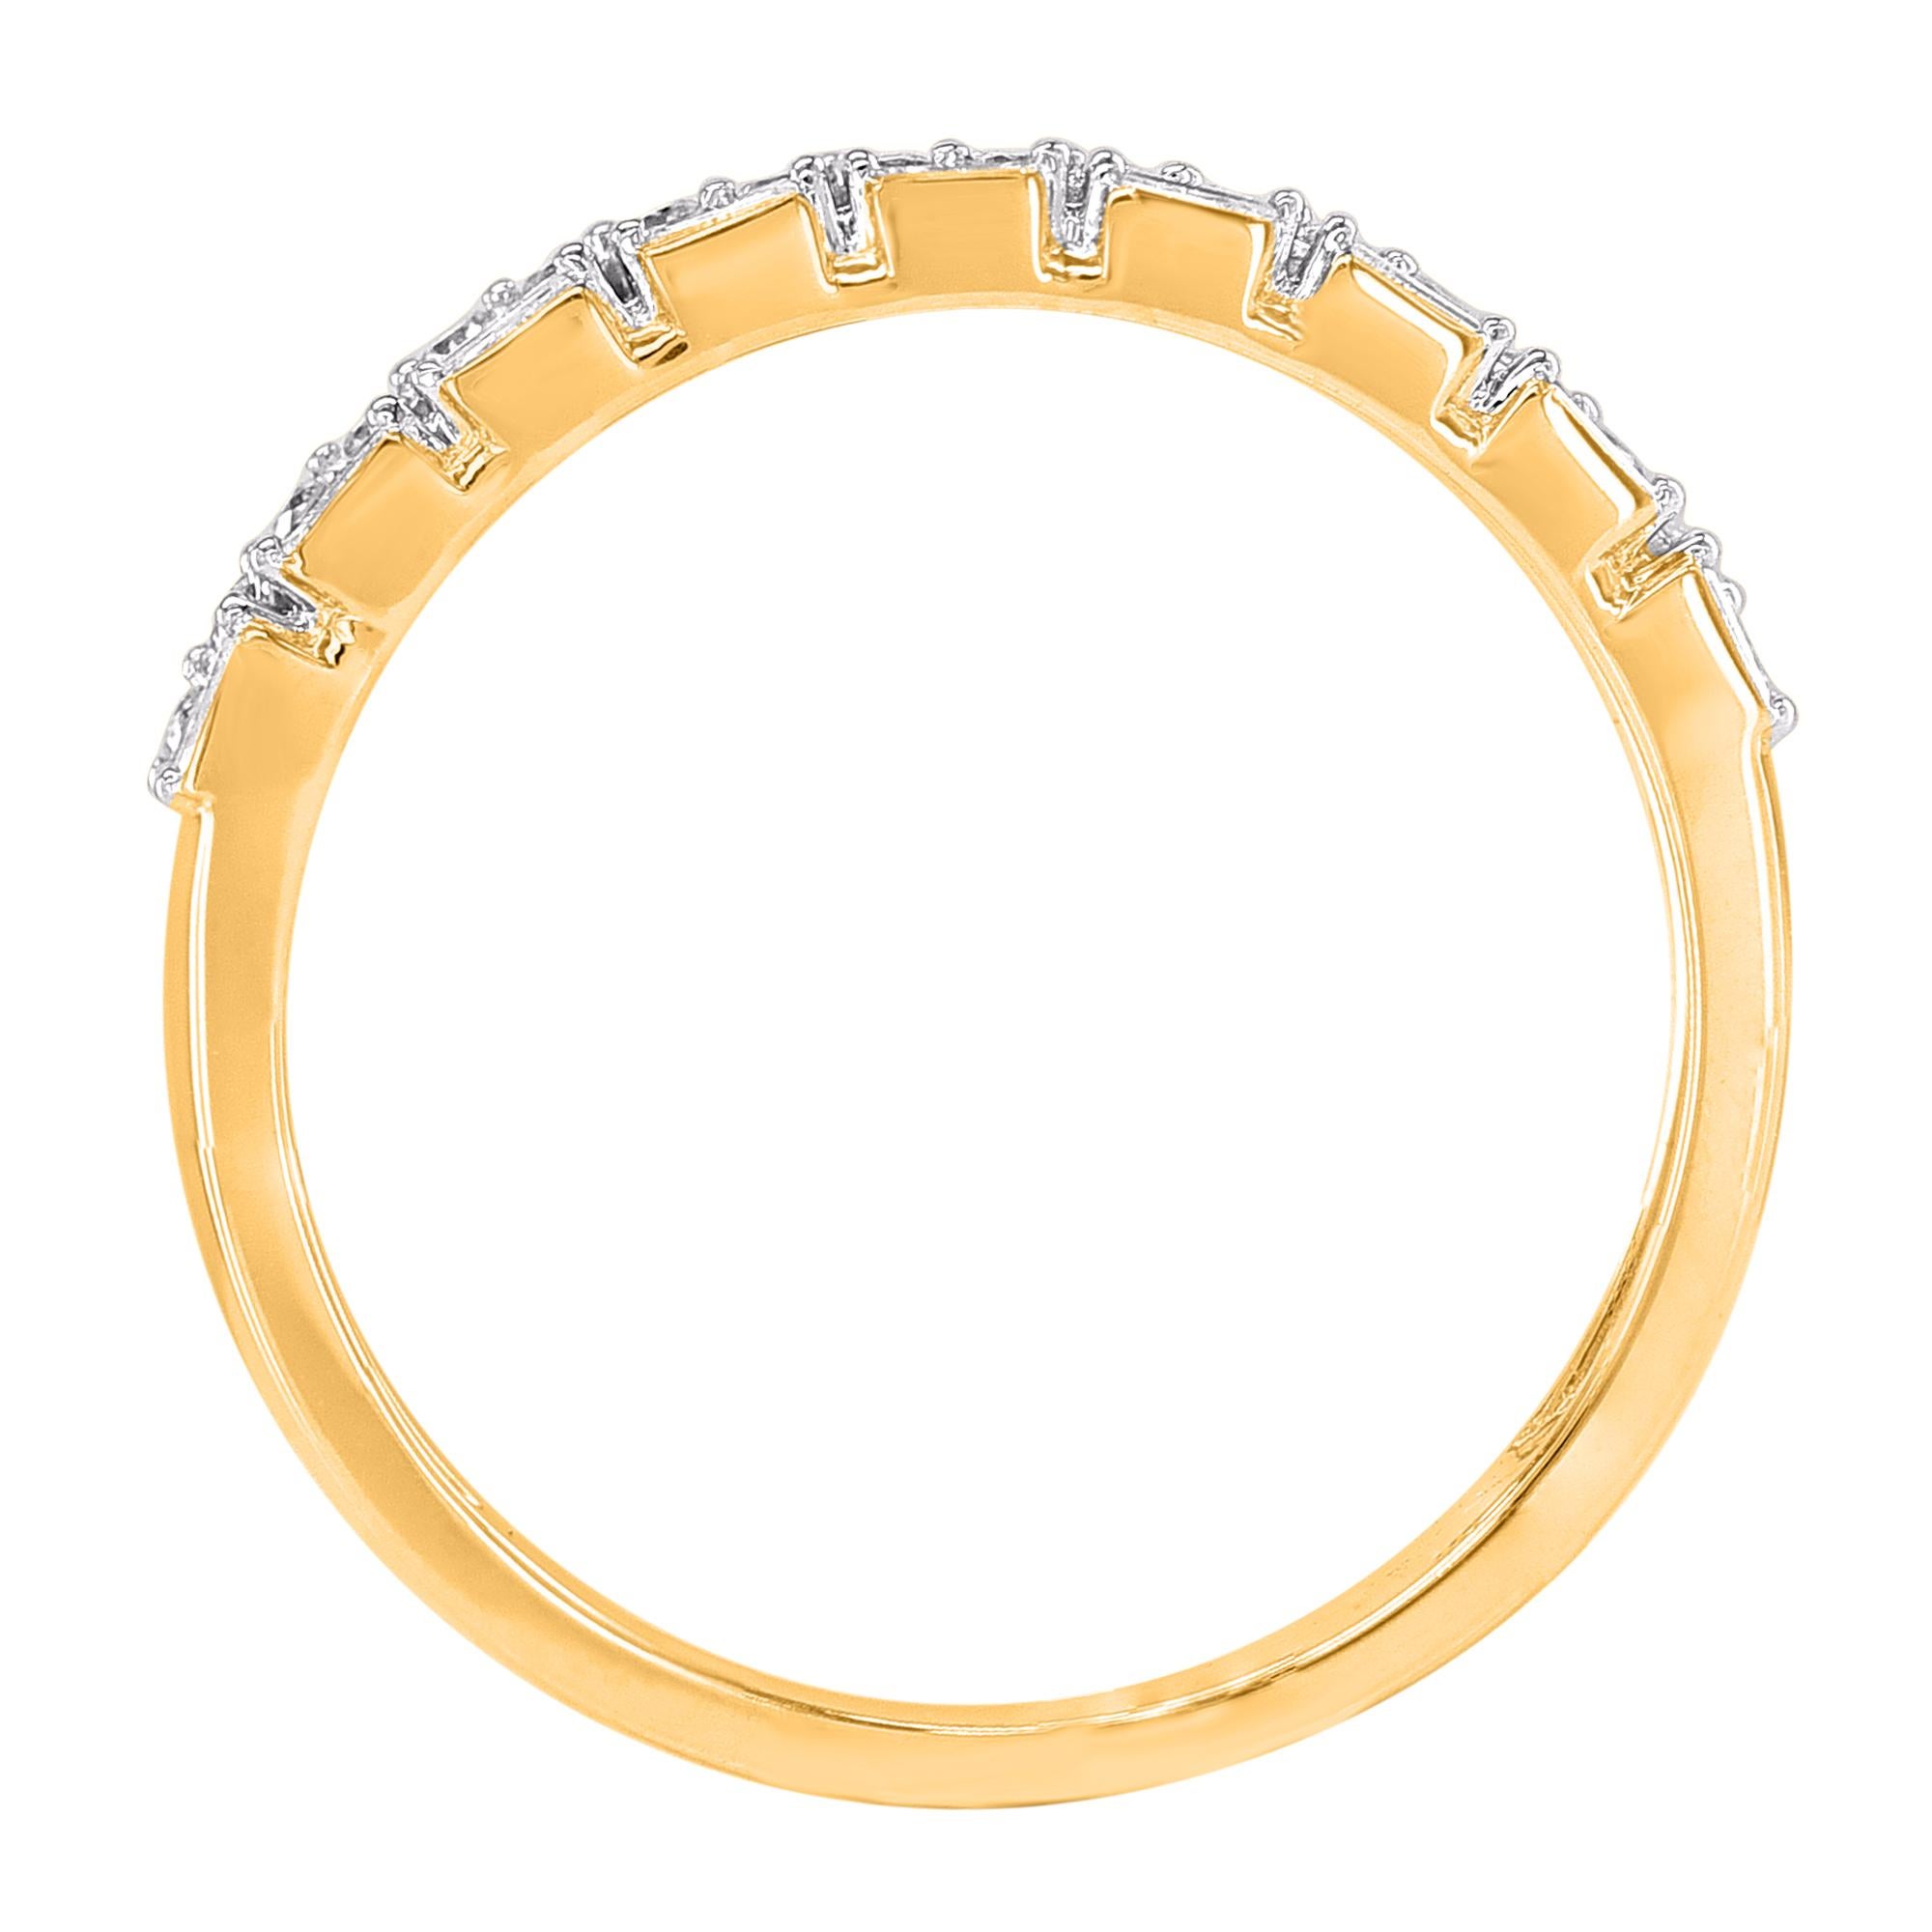 Make your most special and precious day shine with this wedding band ring. Beautifully crafted by our inhouse experts in 14 karat yellow gold and embellished with 27 brilliant cut round diamond and baguette diamonds set in prong setting. Total